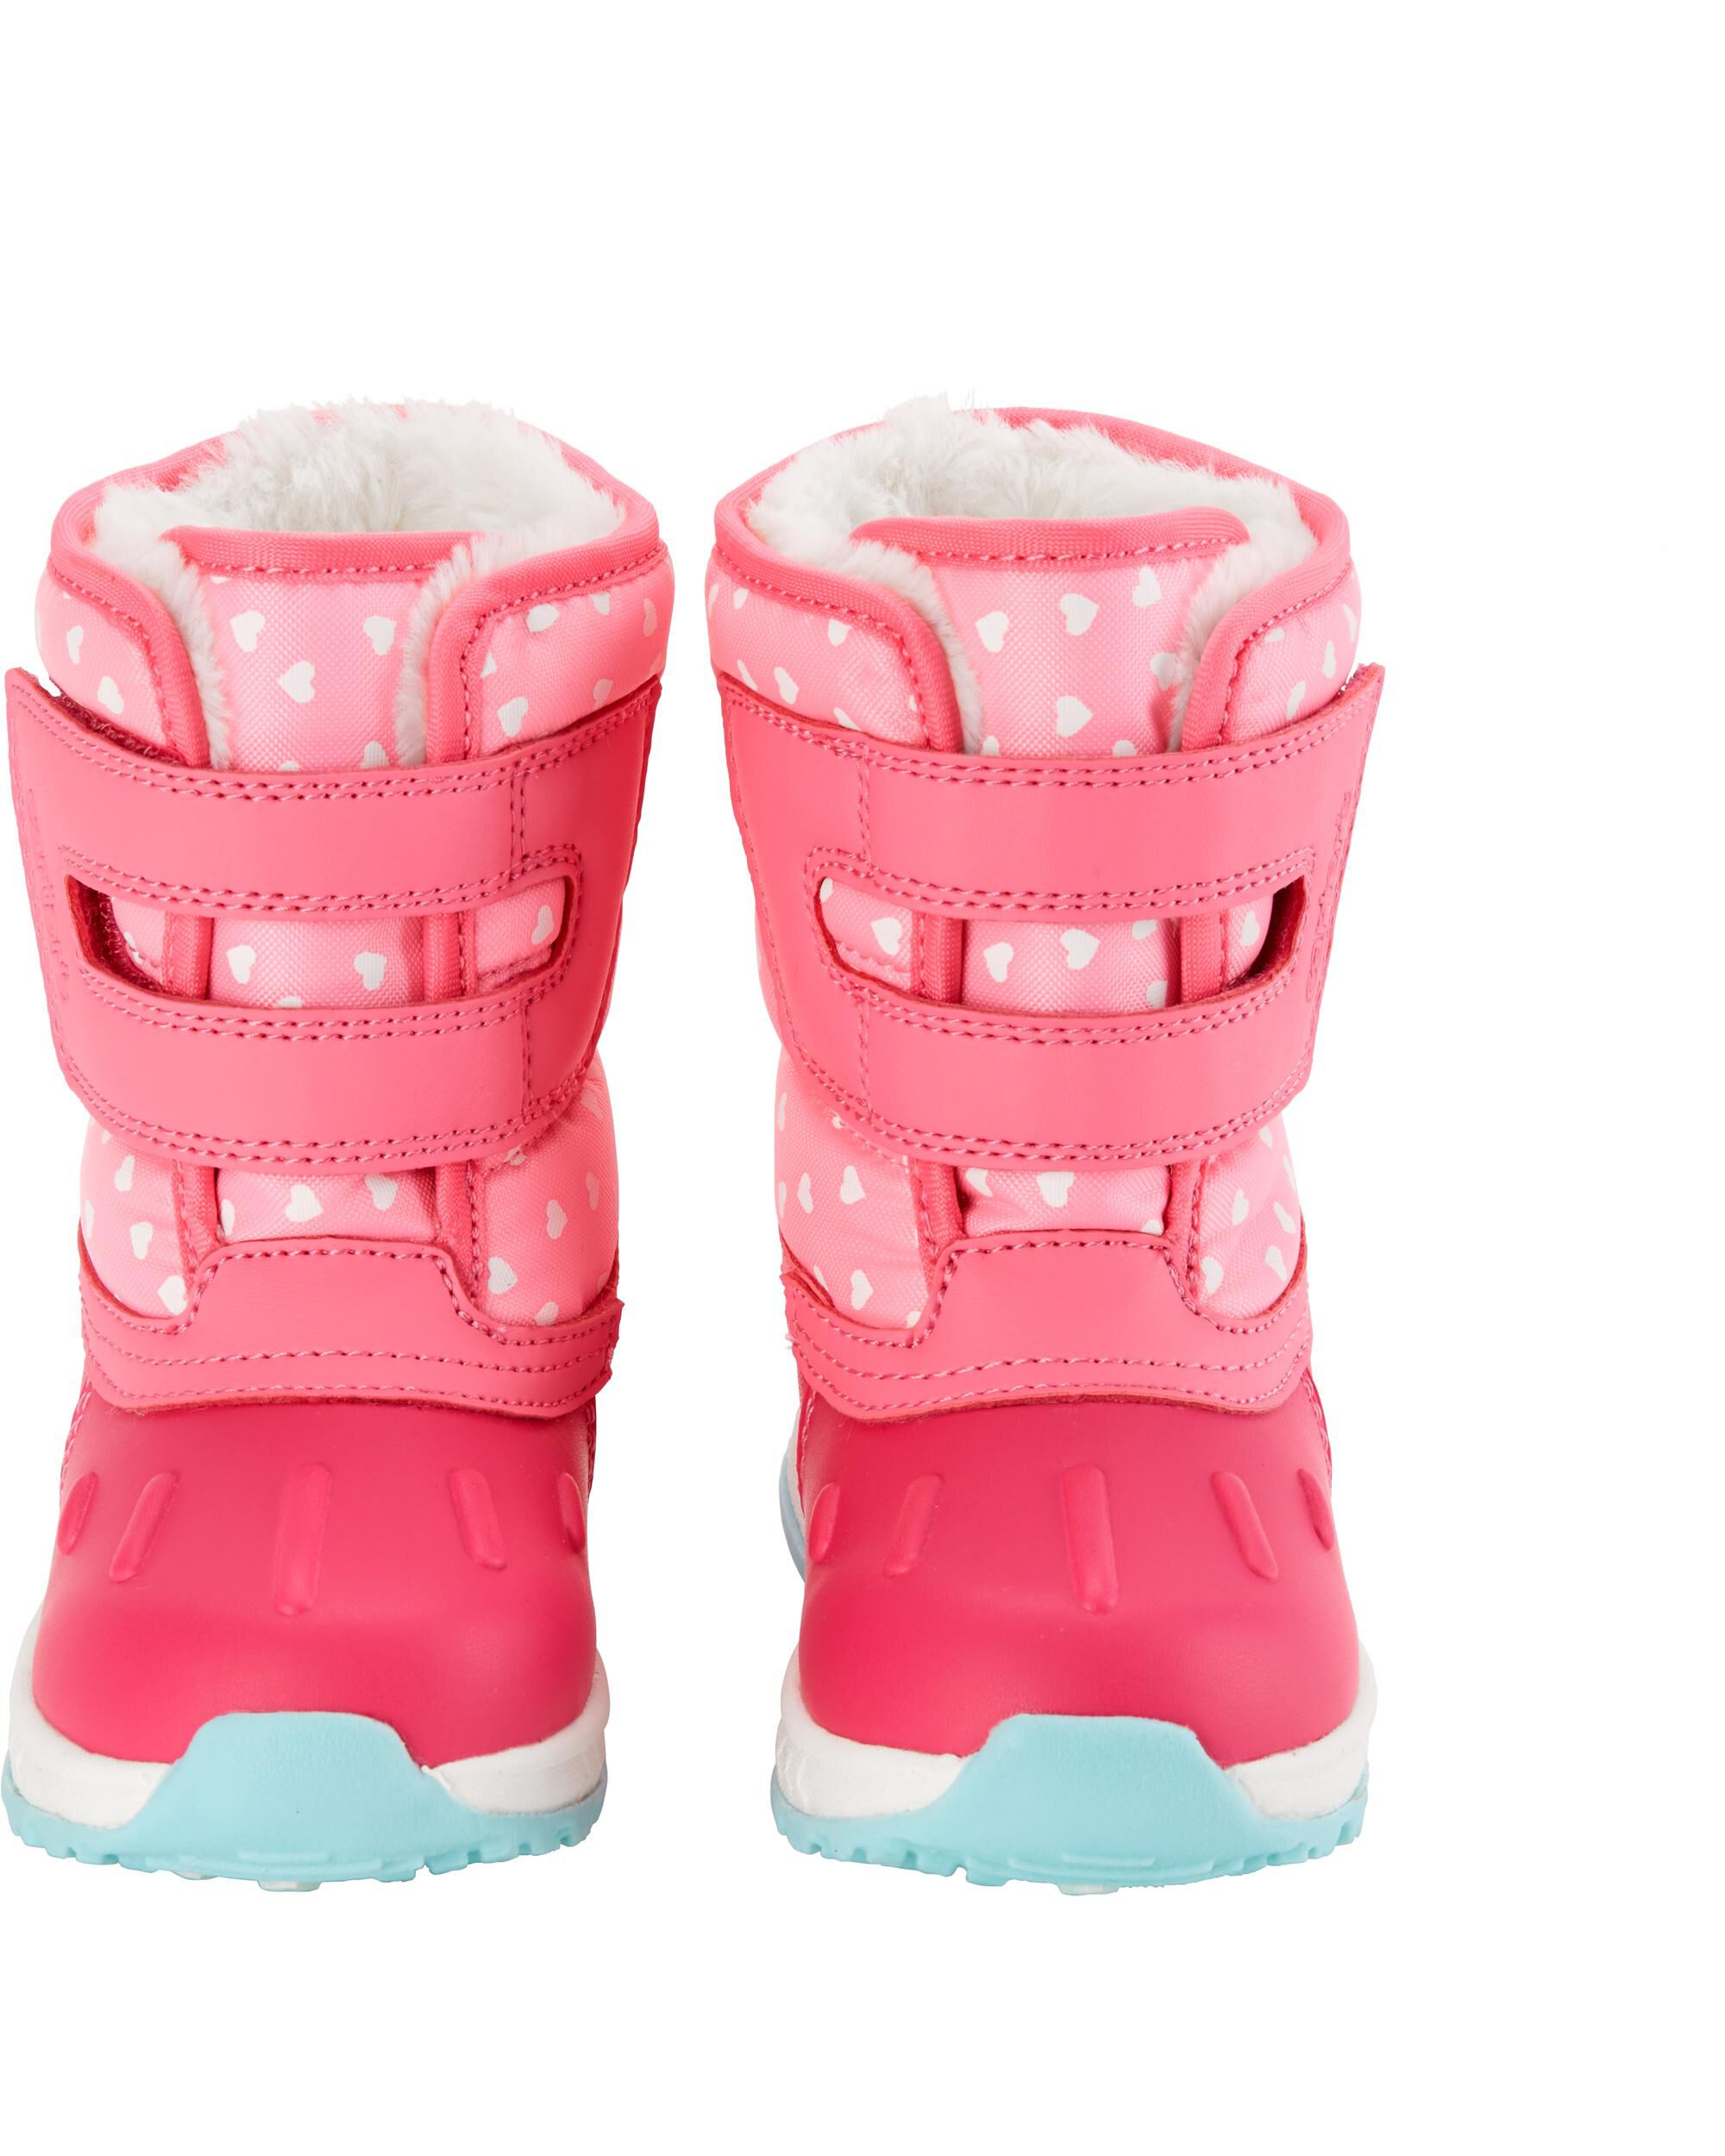 carters baby girl shoes